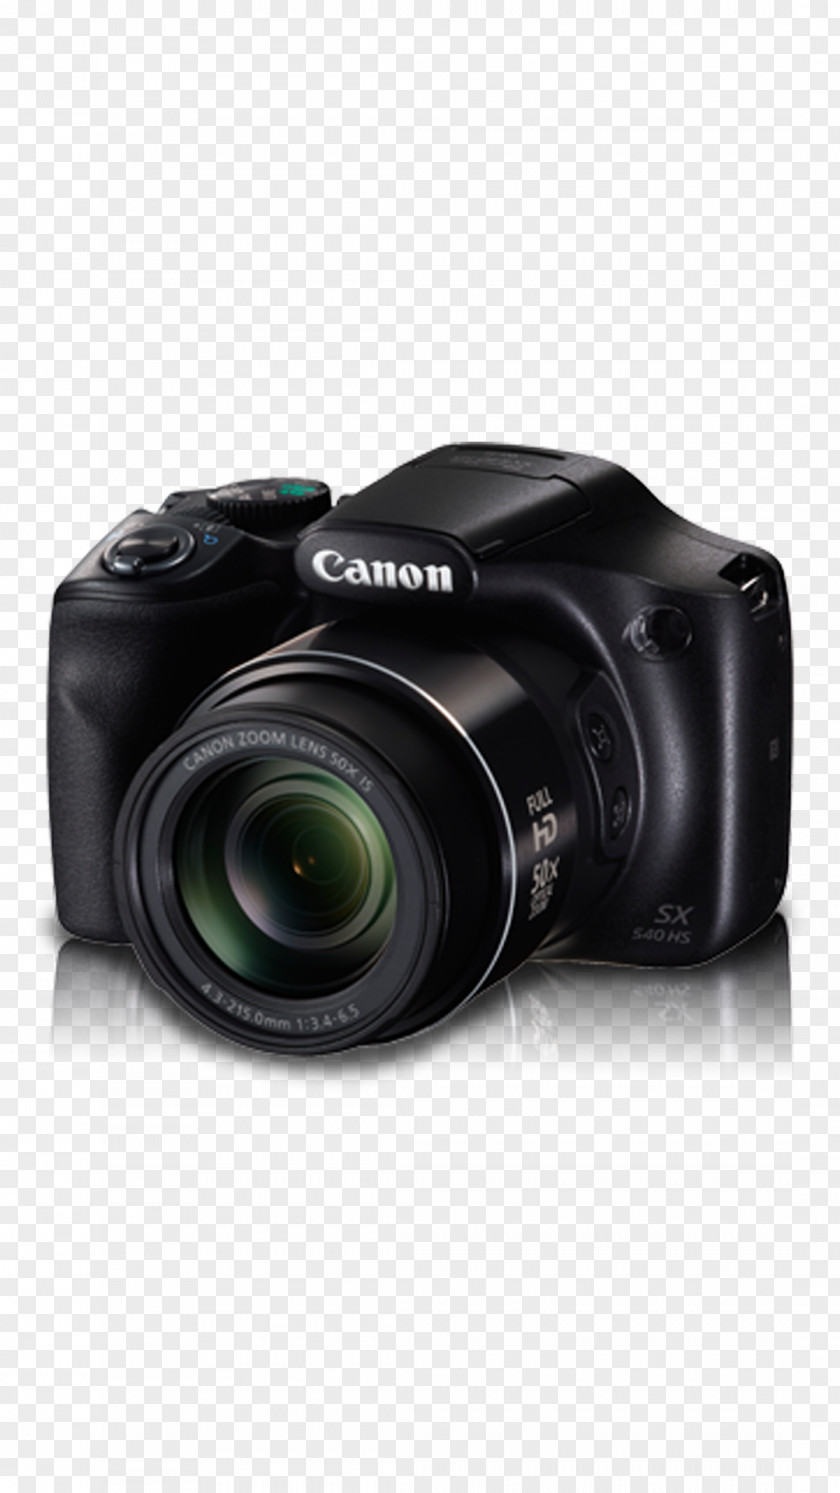 1080pBlack Canon PowerShot SX730 HS SX430 IS Point-and-shoot CameraShoot Camera SX540 20.3 MP Compact Digital PNG